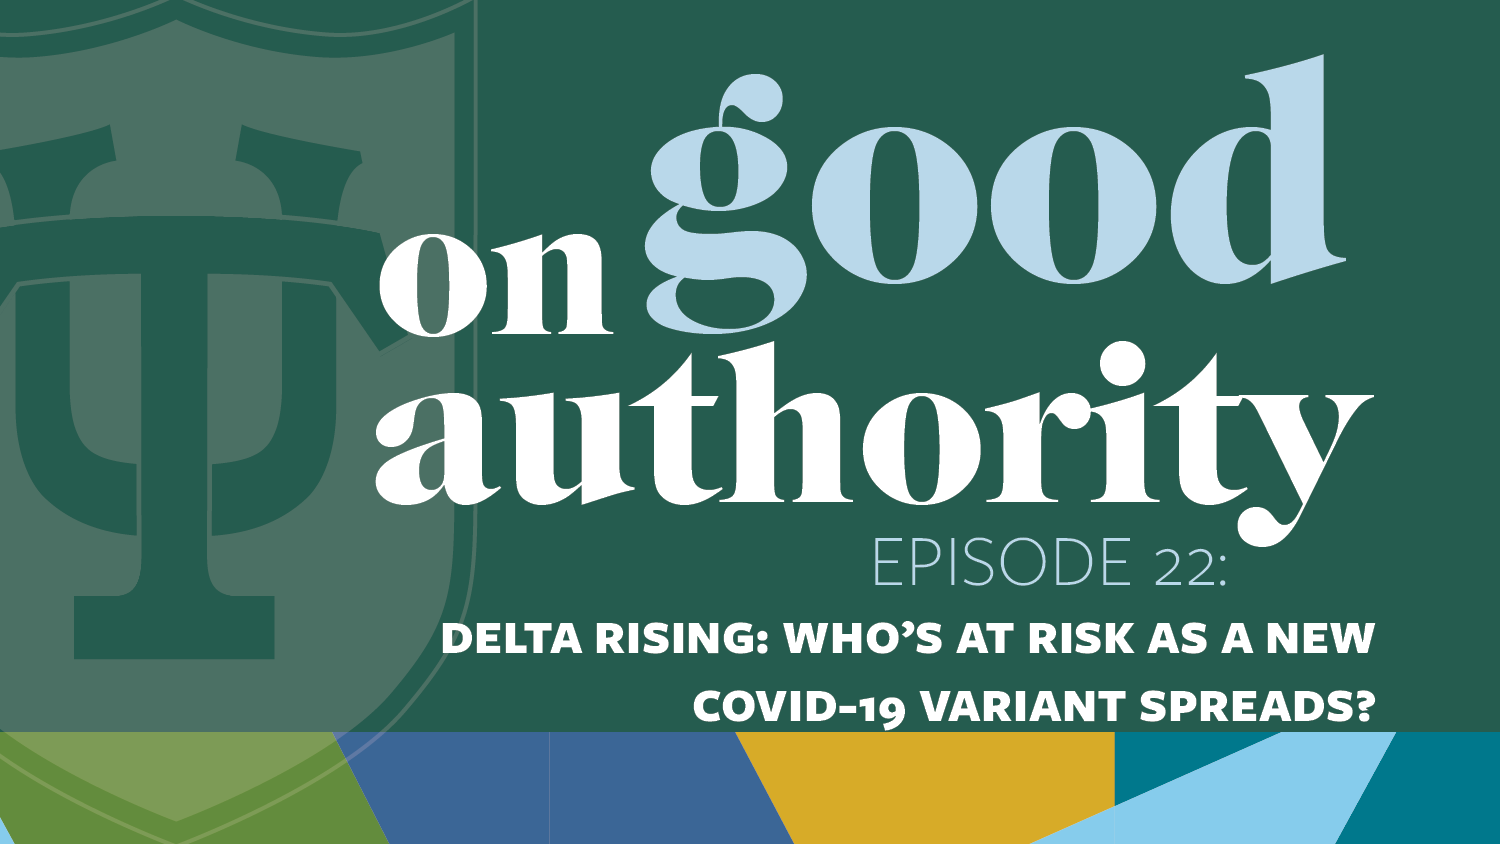 Episode 22 – Delta Rising: Who's at Risk as a new COVID variant spreads?